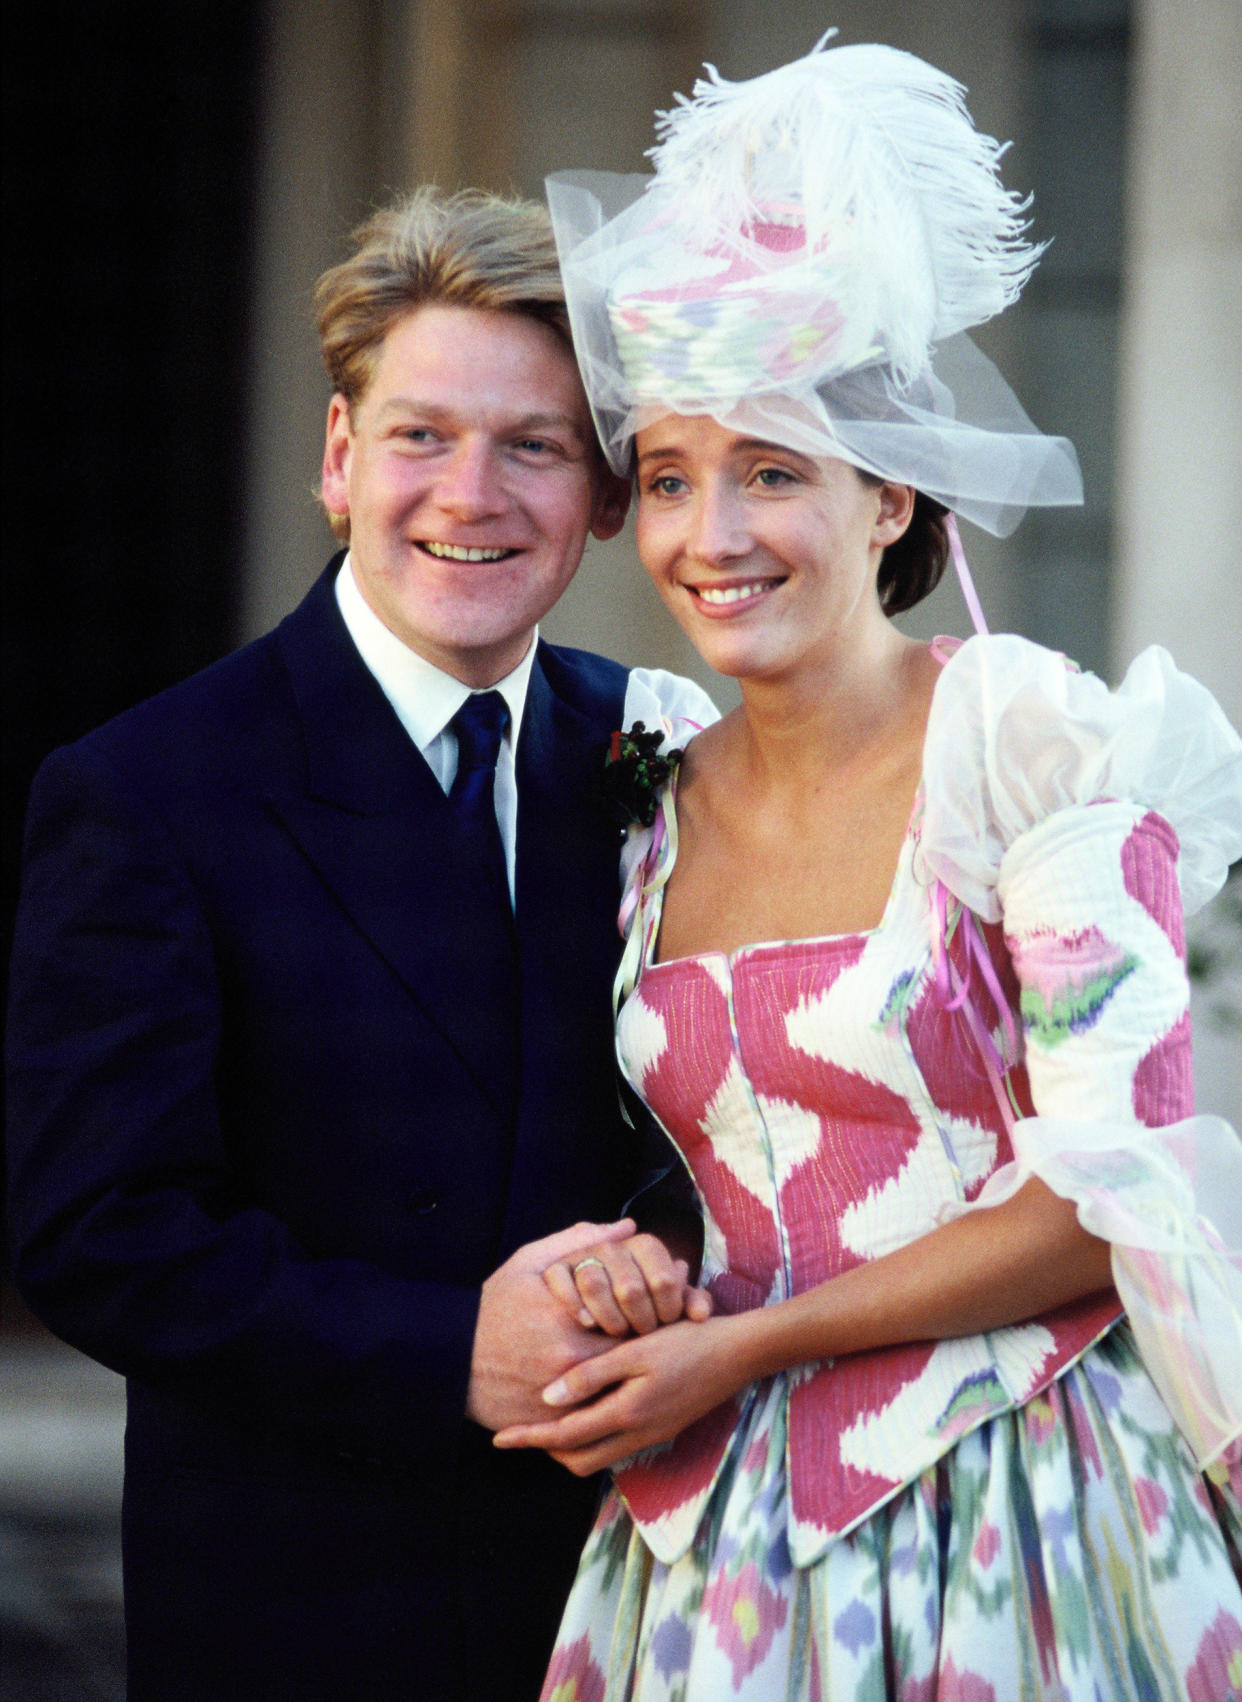 The wedding of Kenneth Branagh and Emma Thompson (Georges De Keerle / Getty Images)